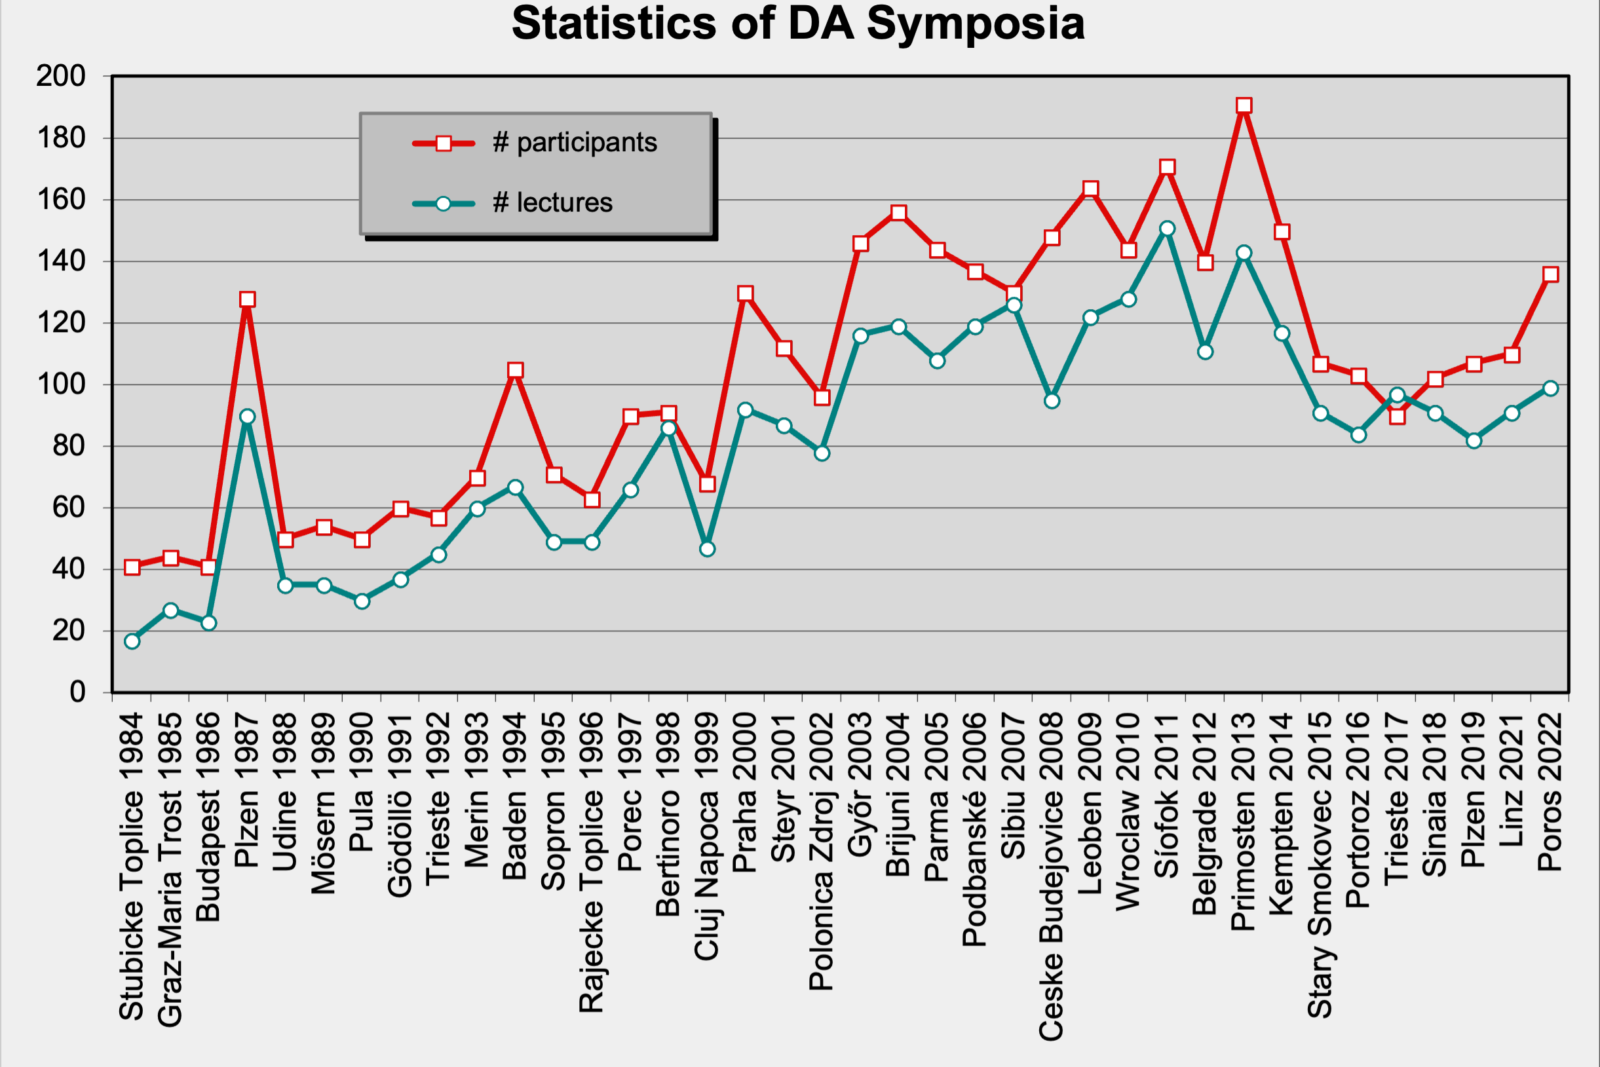 Statistics of DA Symposia: number of participants/lecturers at previous symposia from 1984 to 2022